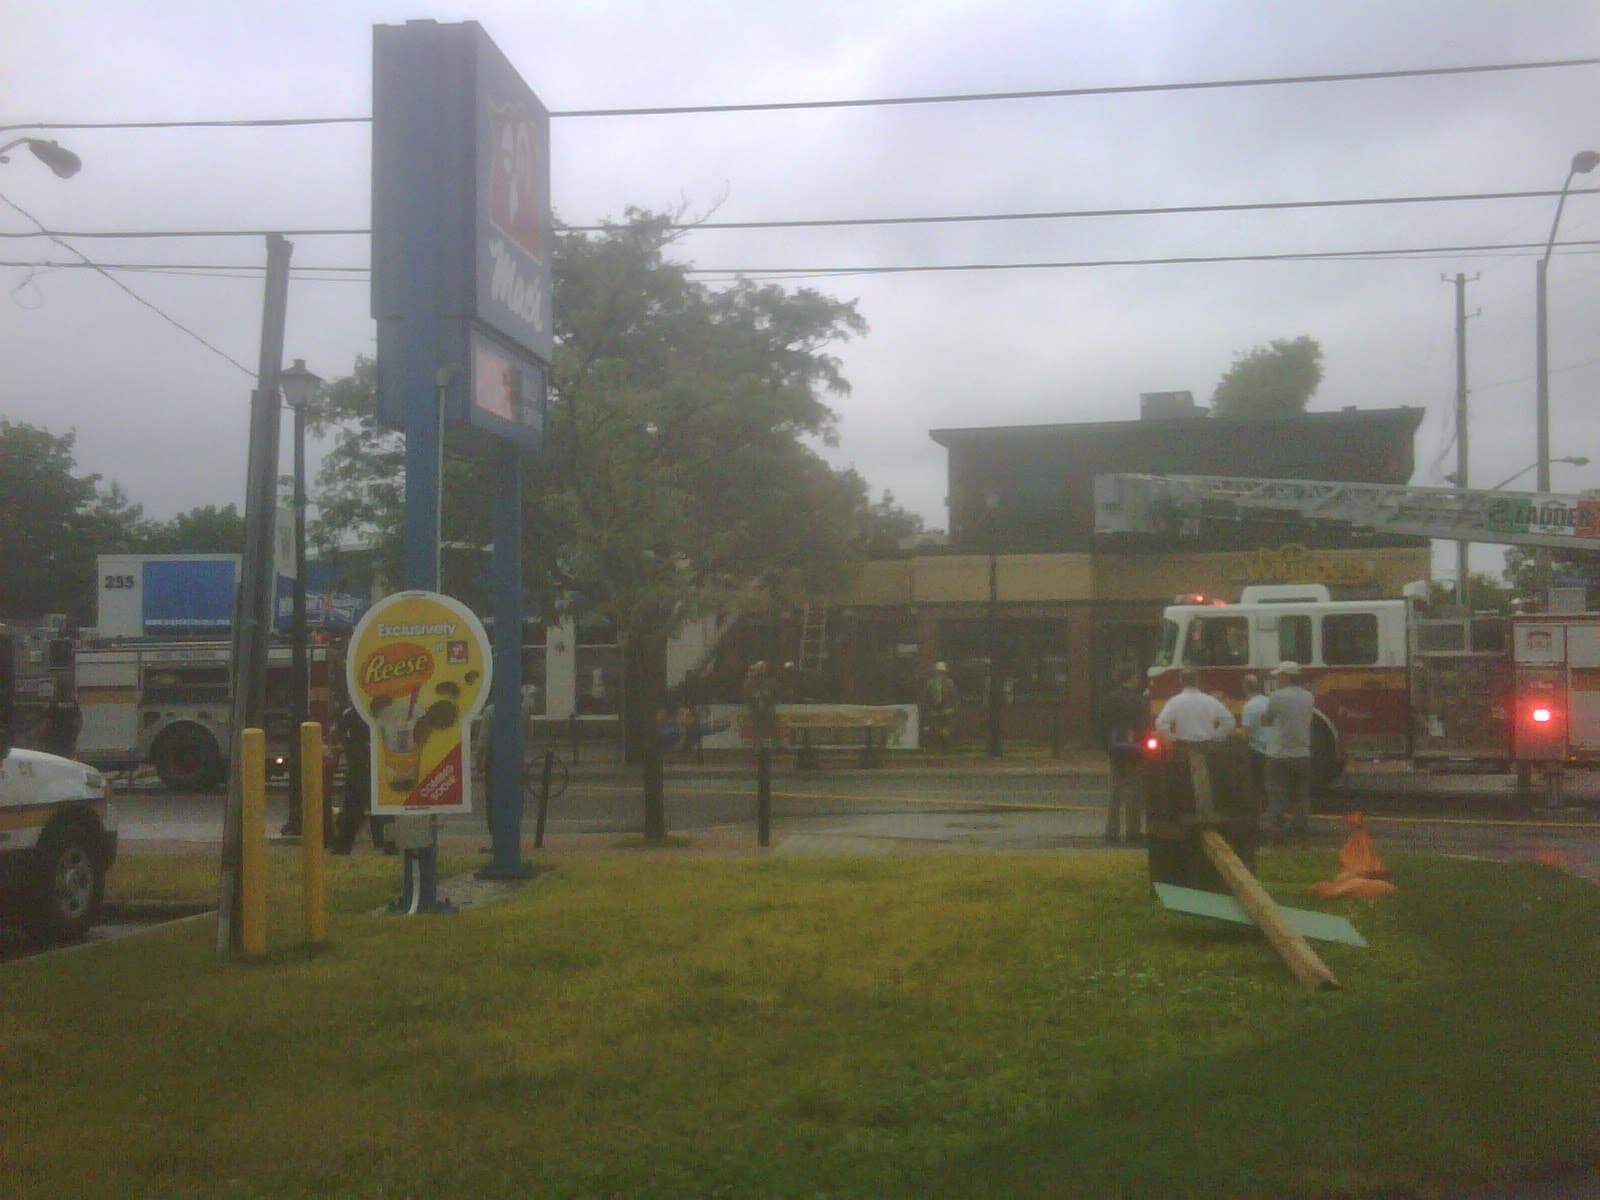 June 24, 2011 - my cell phone snapped this photo through the misty morning air, soon after the fire trucks had arrived on scene.